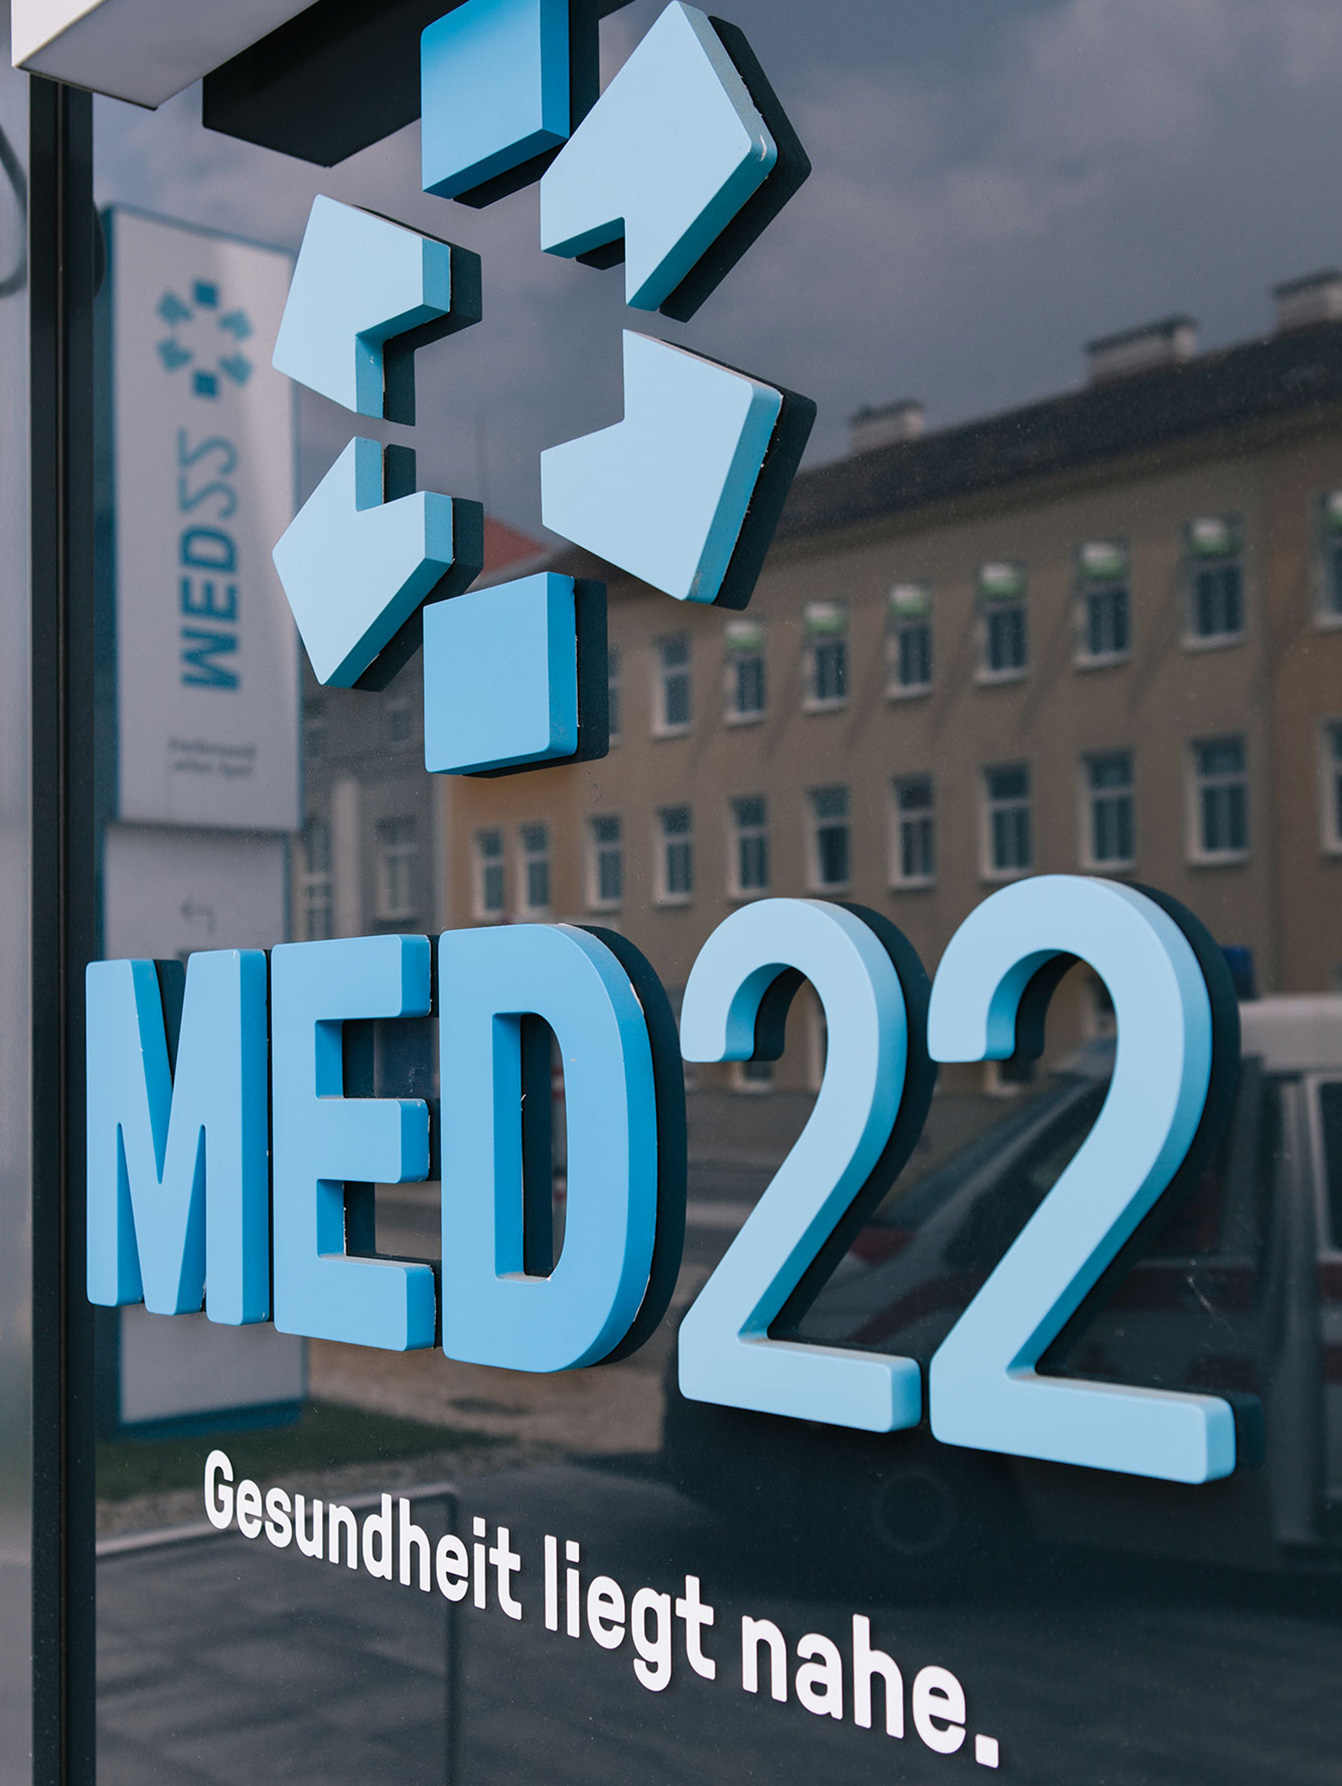 Detail of branding with logo and lettering in blue applied to glass facade